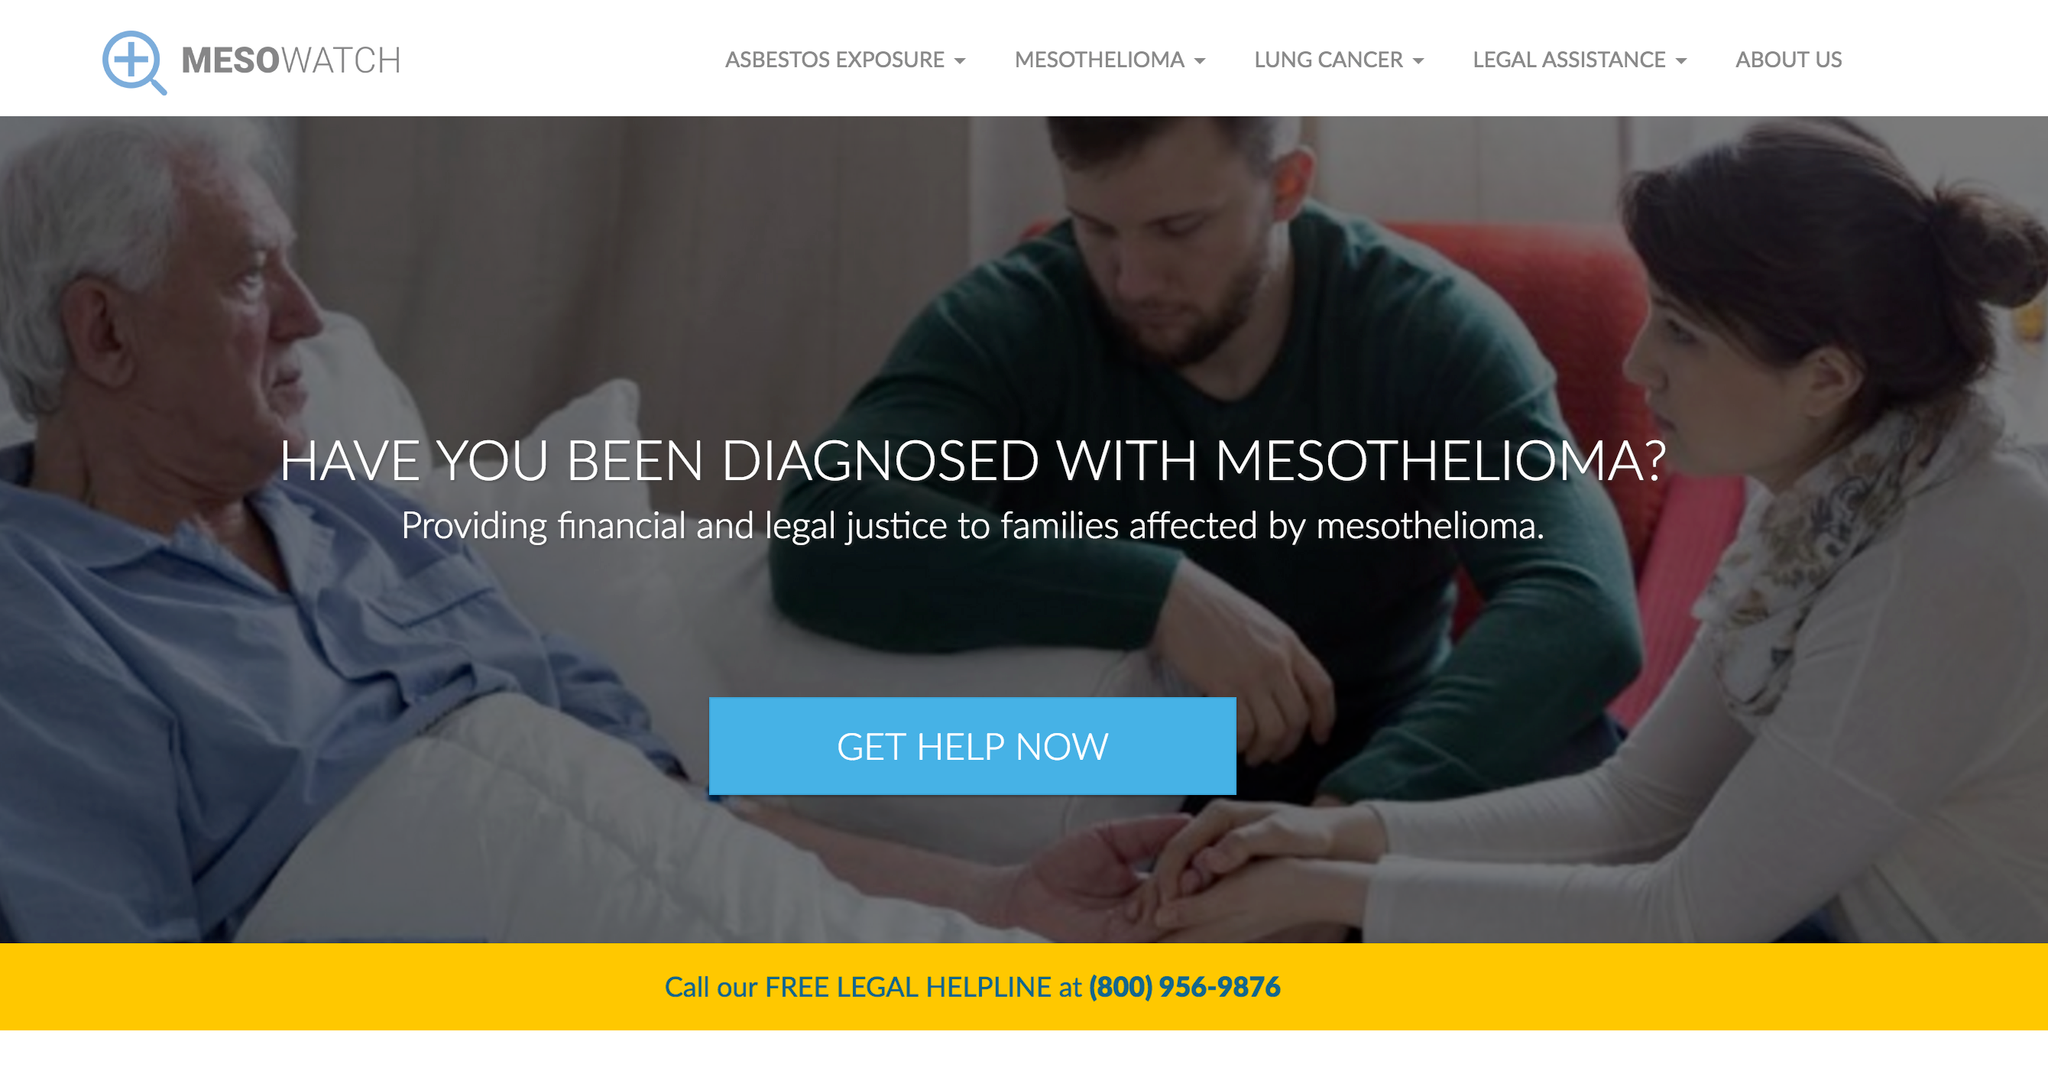 Asbestos Law Firm Mesowatch Launches to Fight for Mesothelioma Victims